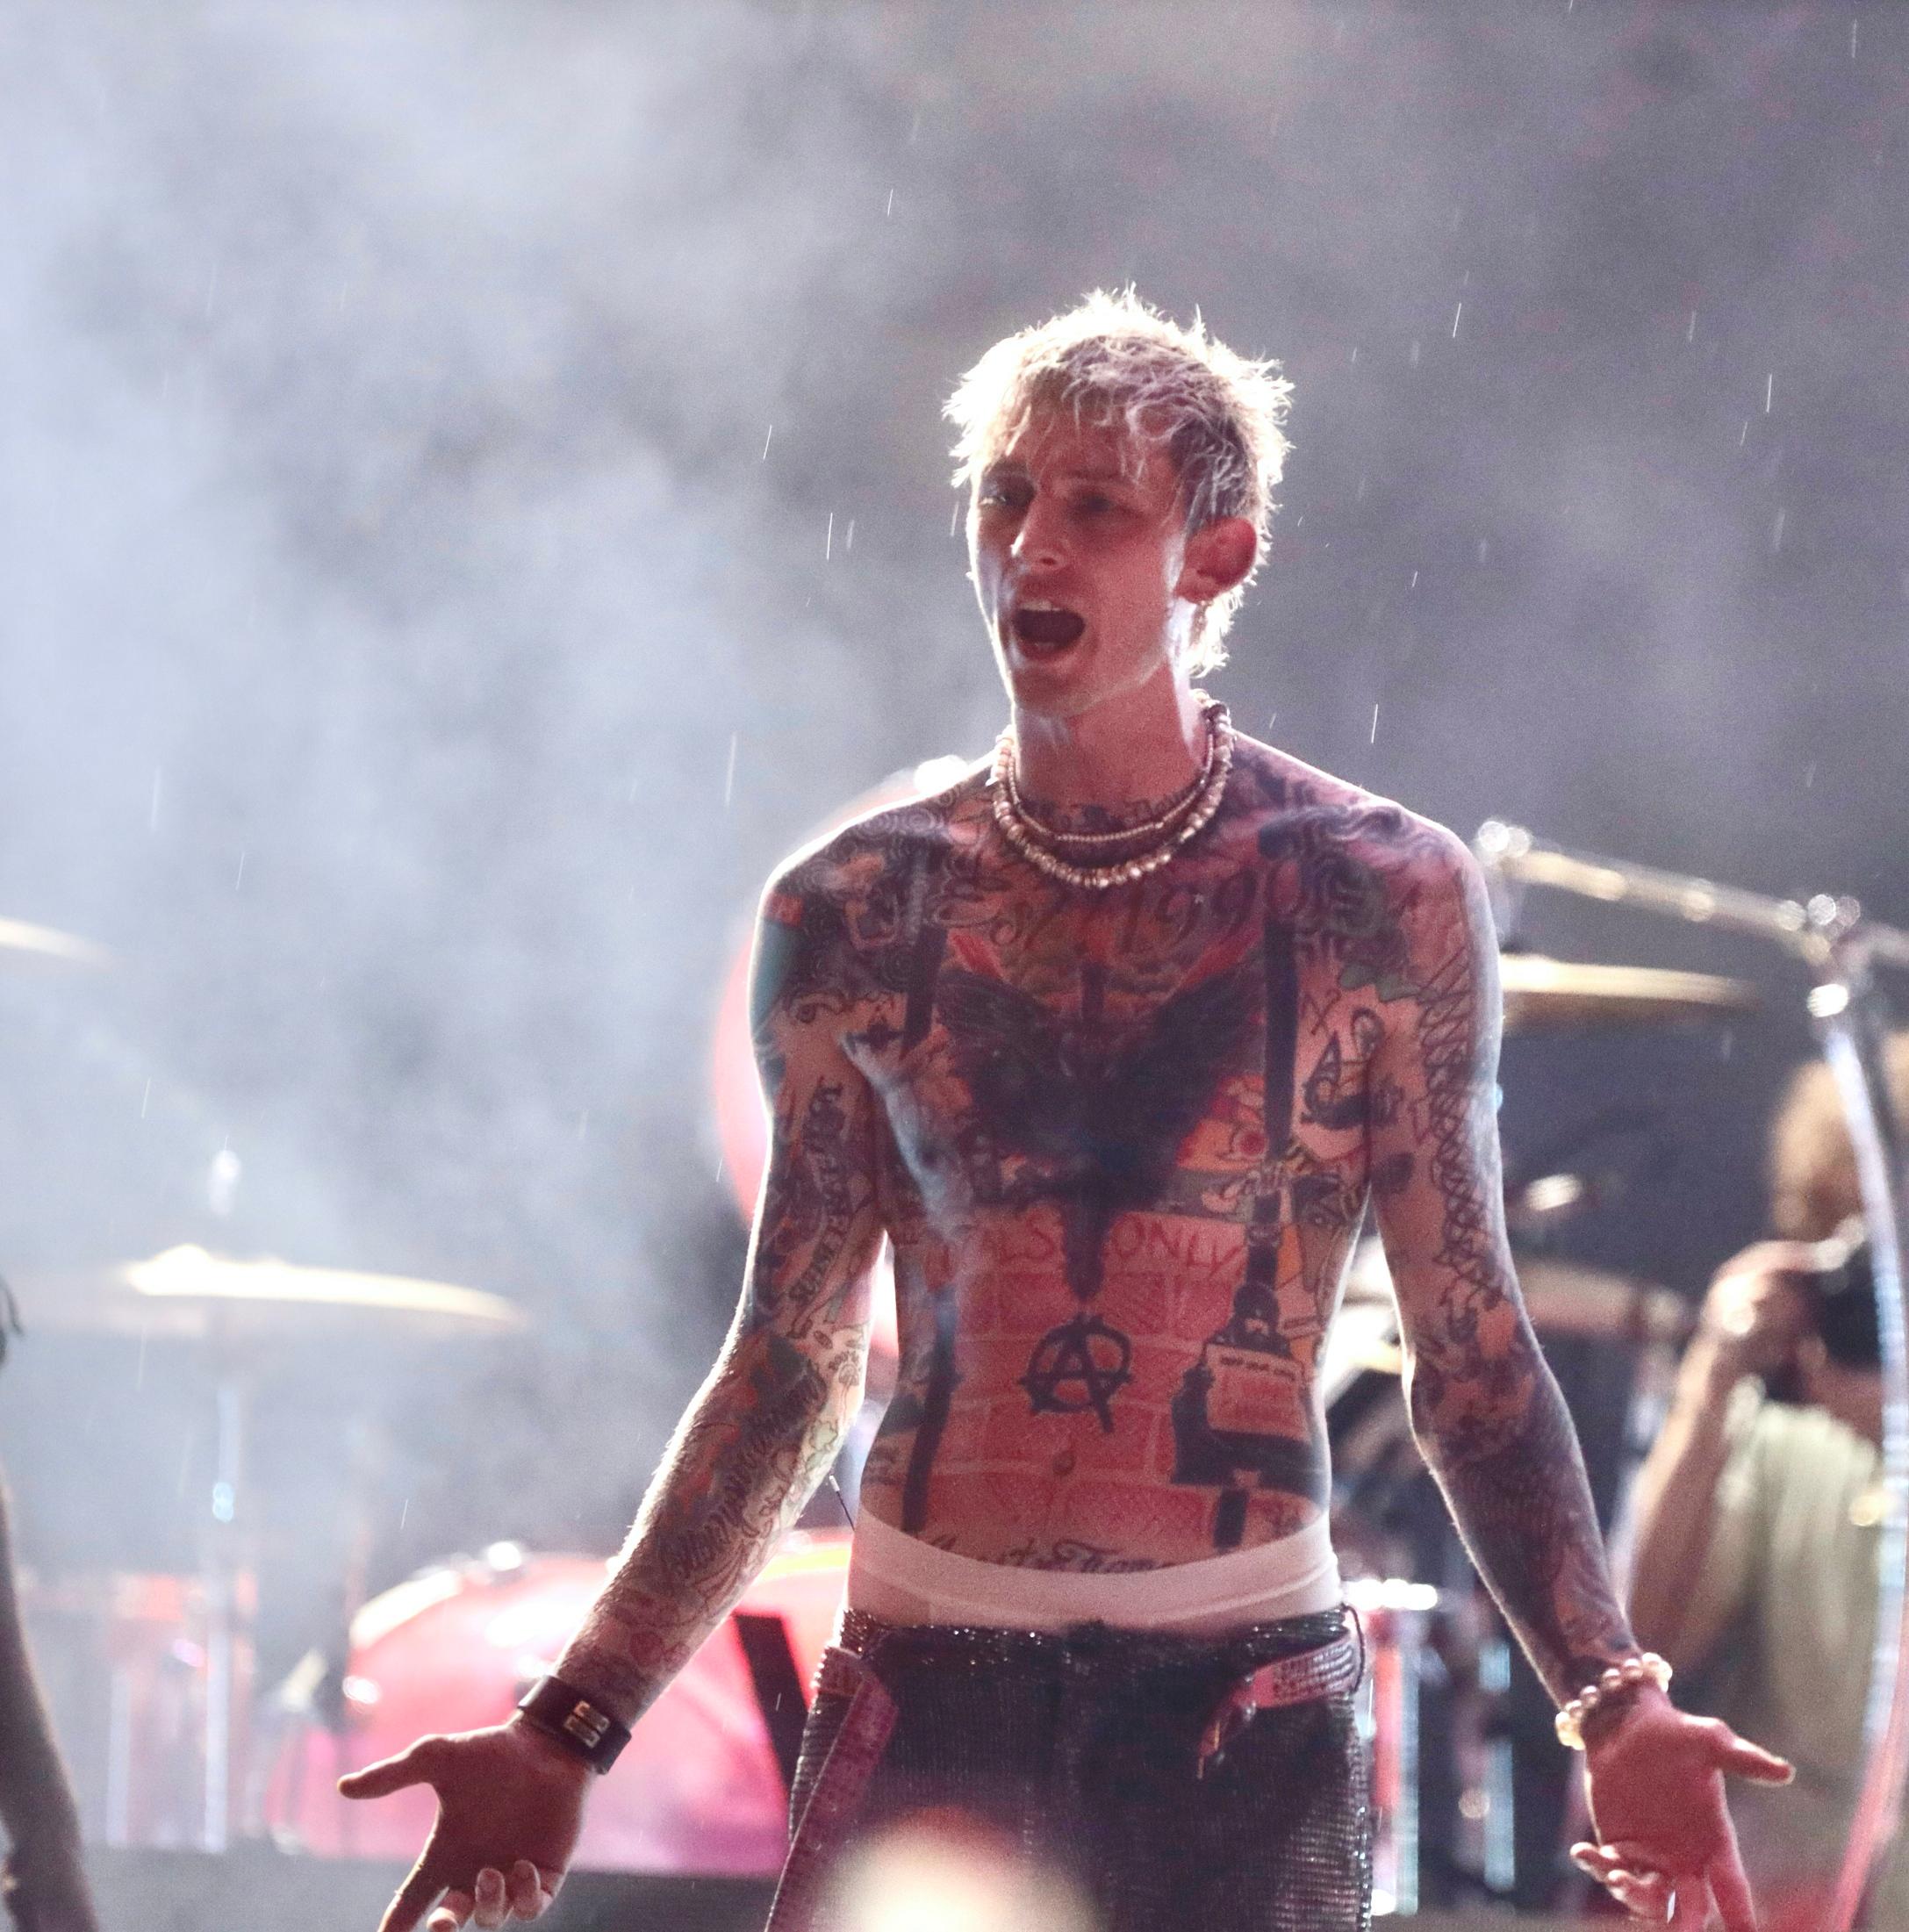 Machine Gun Kelly Tries to continue his Summer stage Central Park concert despite the officials turning off the sound system because of an approaching thunderstorm.